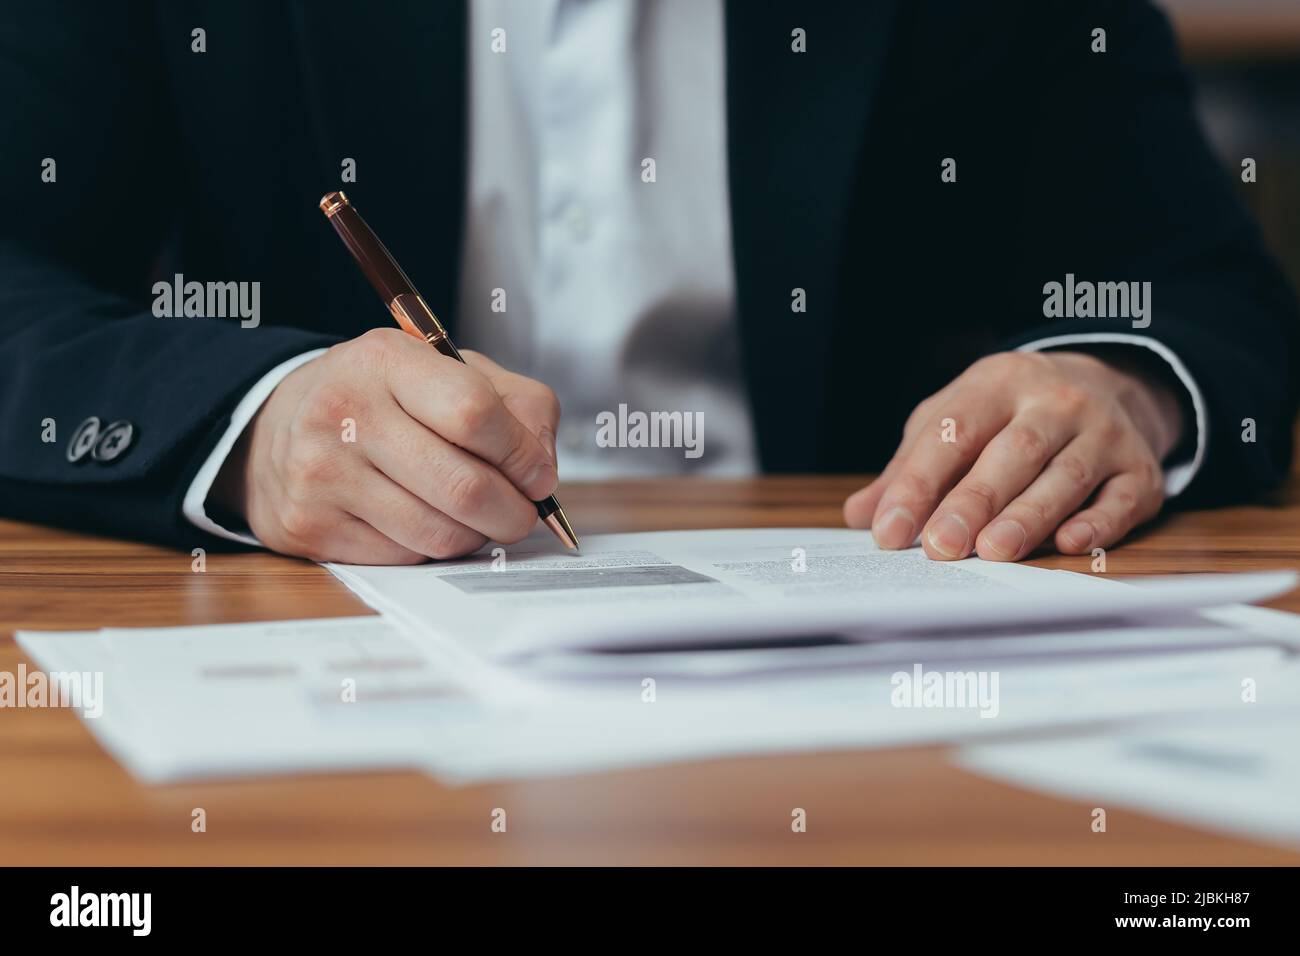 Close-up photo of Asian businessman's hands signing bank documents, man working in modern office, sitting at table, banker's paperwork Stock Photo